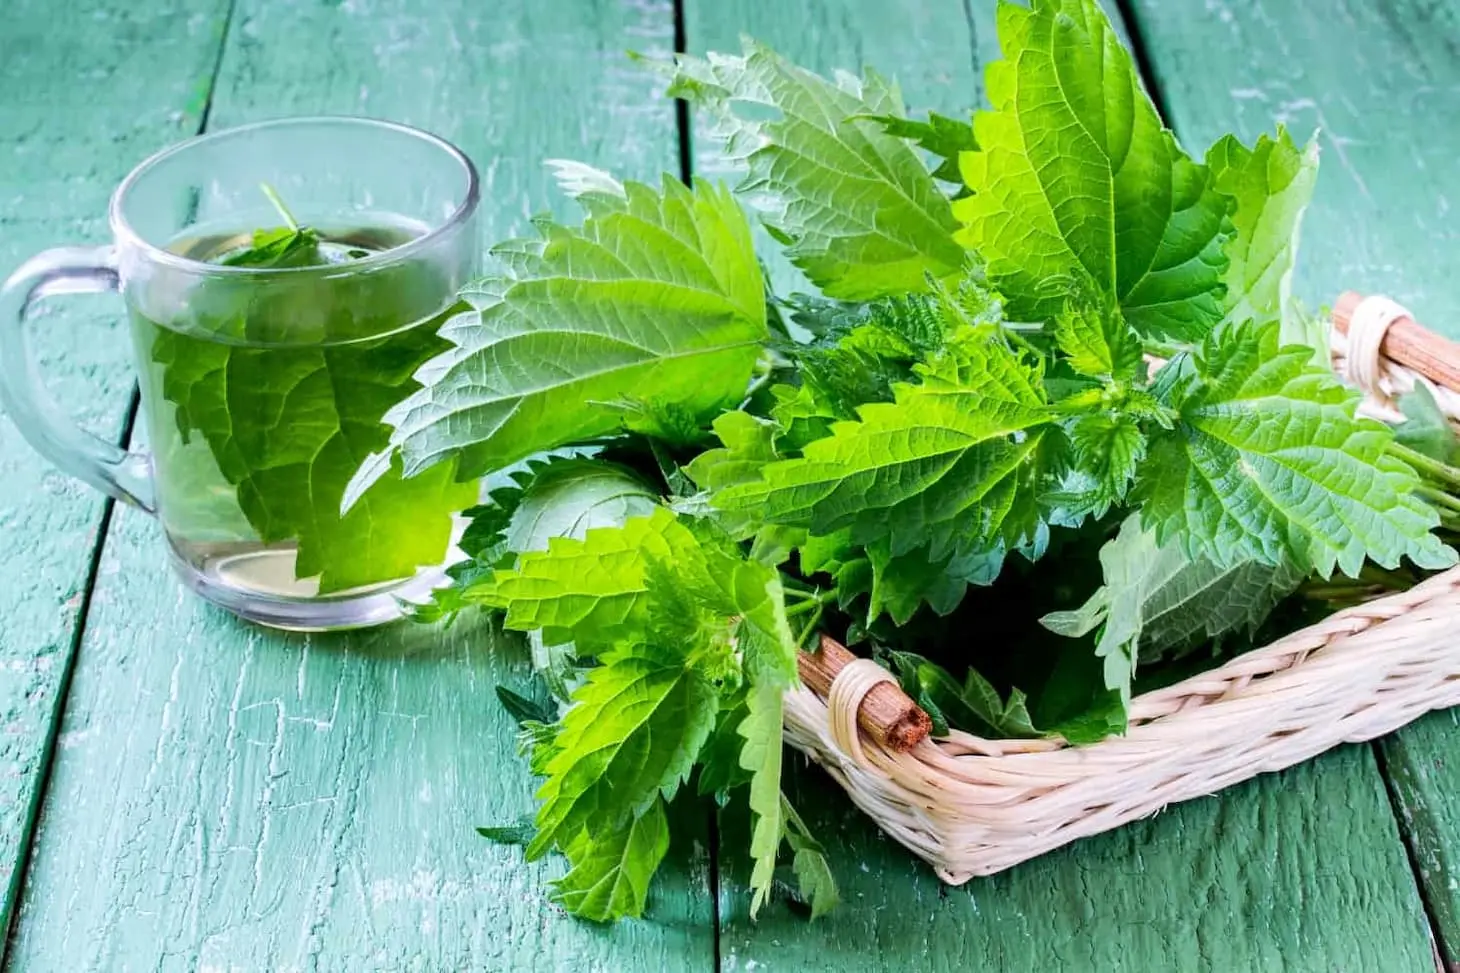 medicinal-plant-nettles-fresh-leaves-and-infusion-picture-id531617718